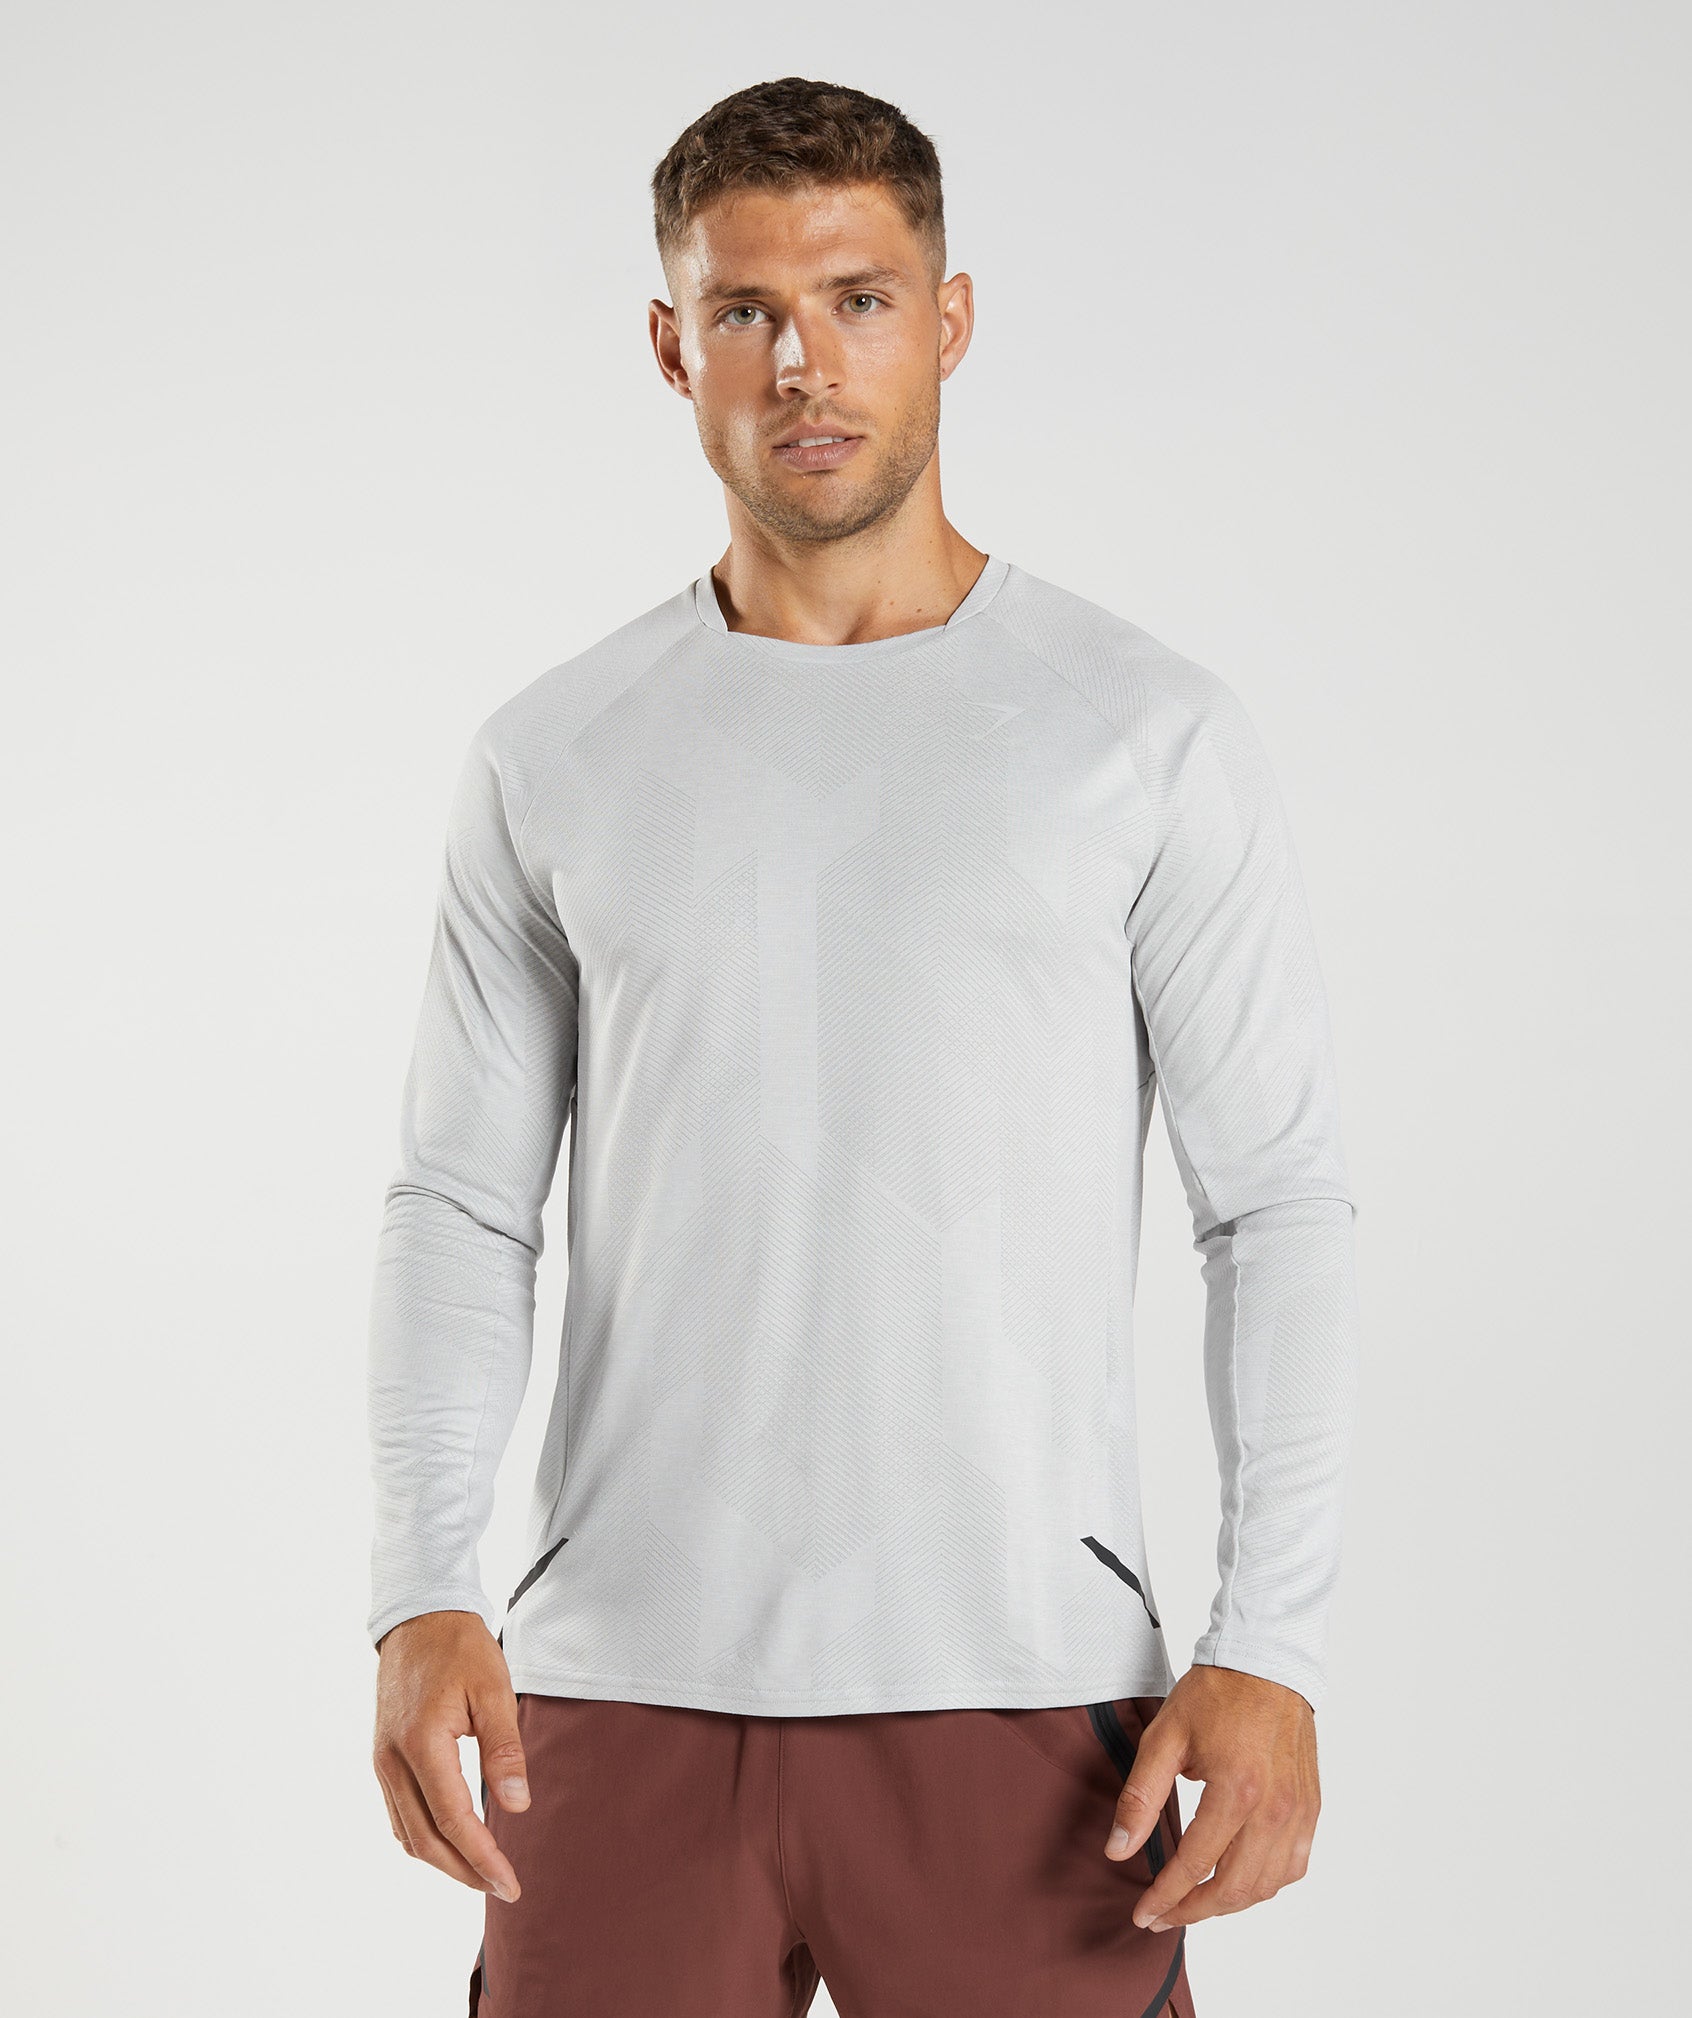 Apex Long Sleeve T-Shirt in Light Grey/White - view 1